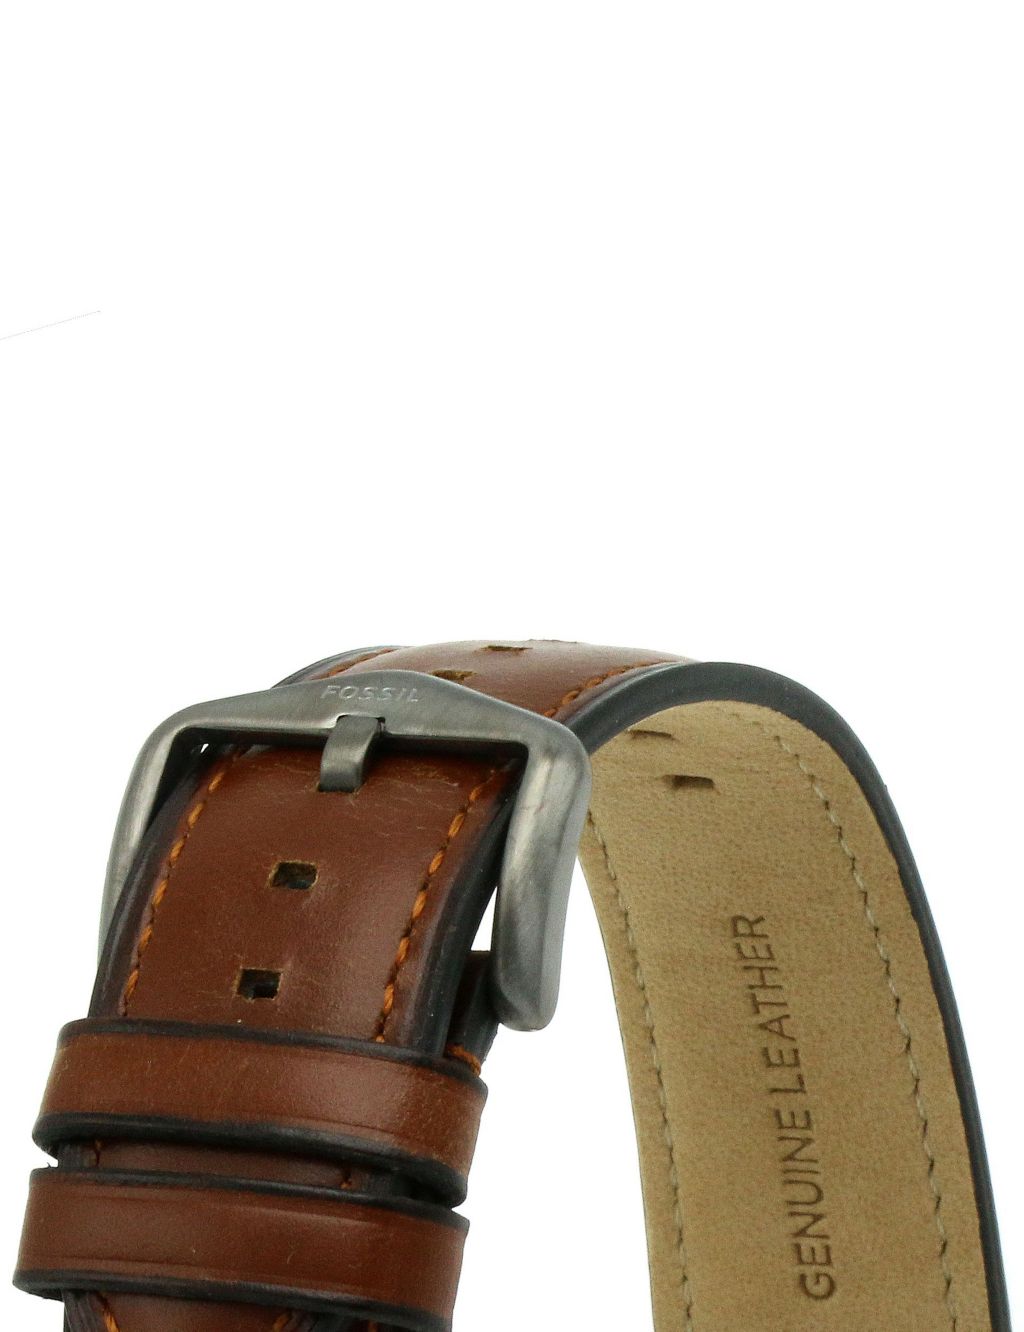 Fossil Townsman Brown Leather Watch image 3